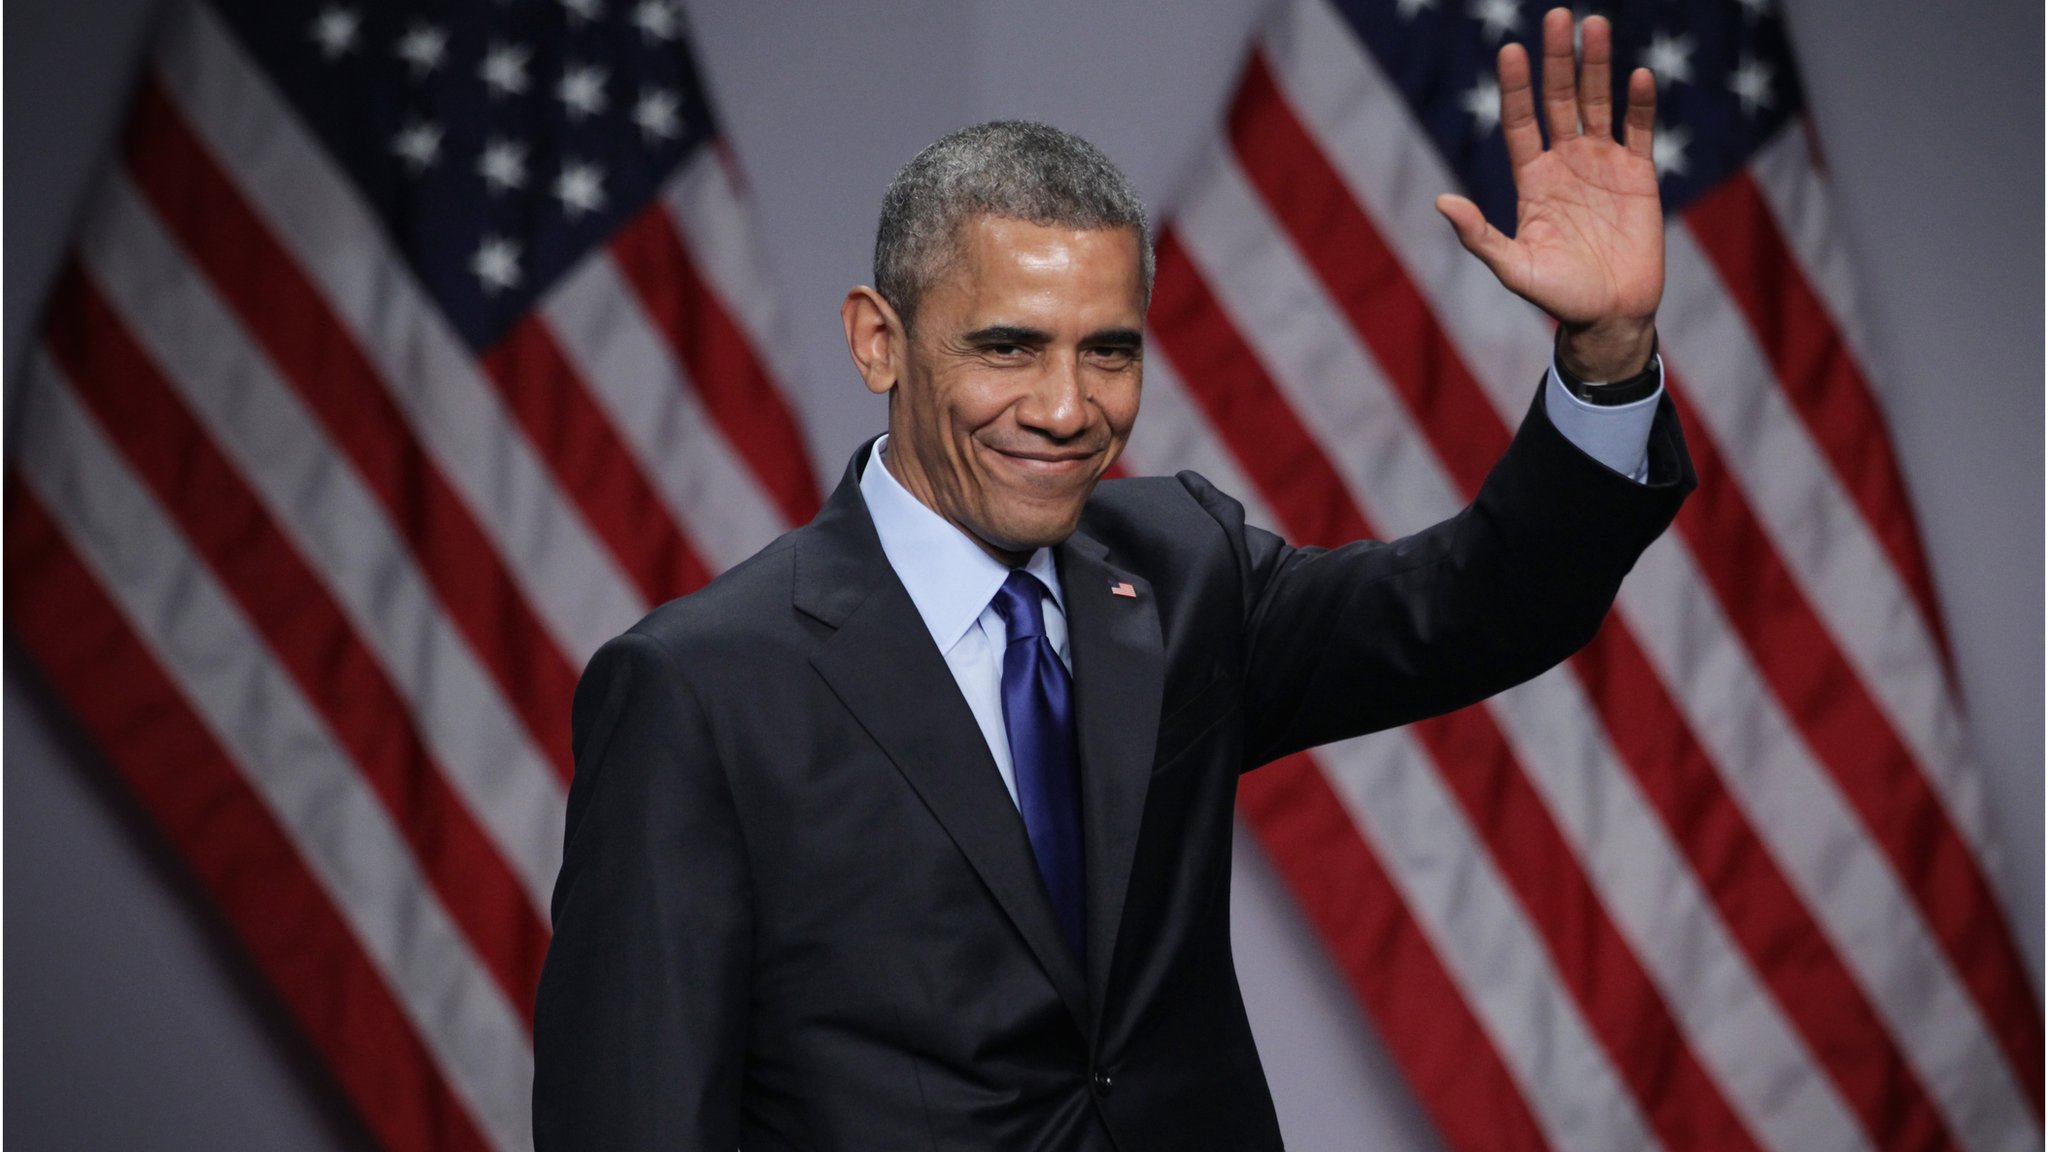 Everyone in Generation Z should follow this inspiring lesson from Barack Obama